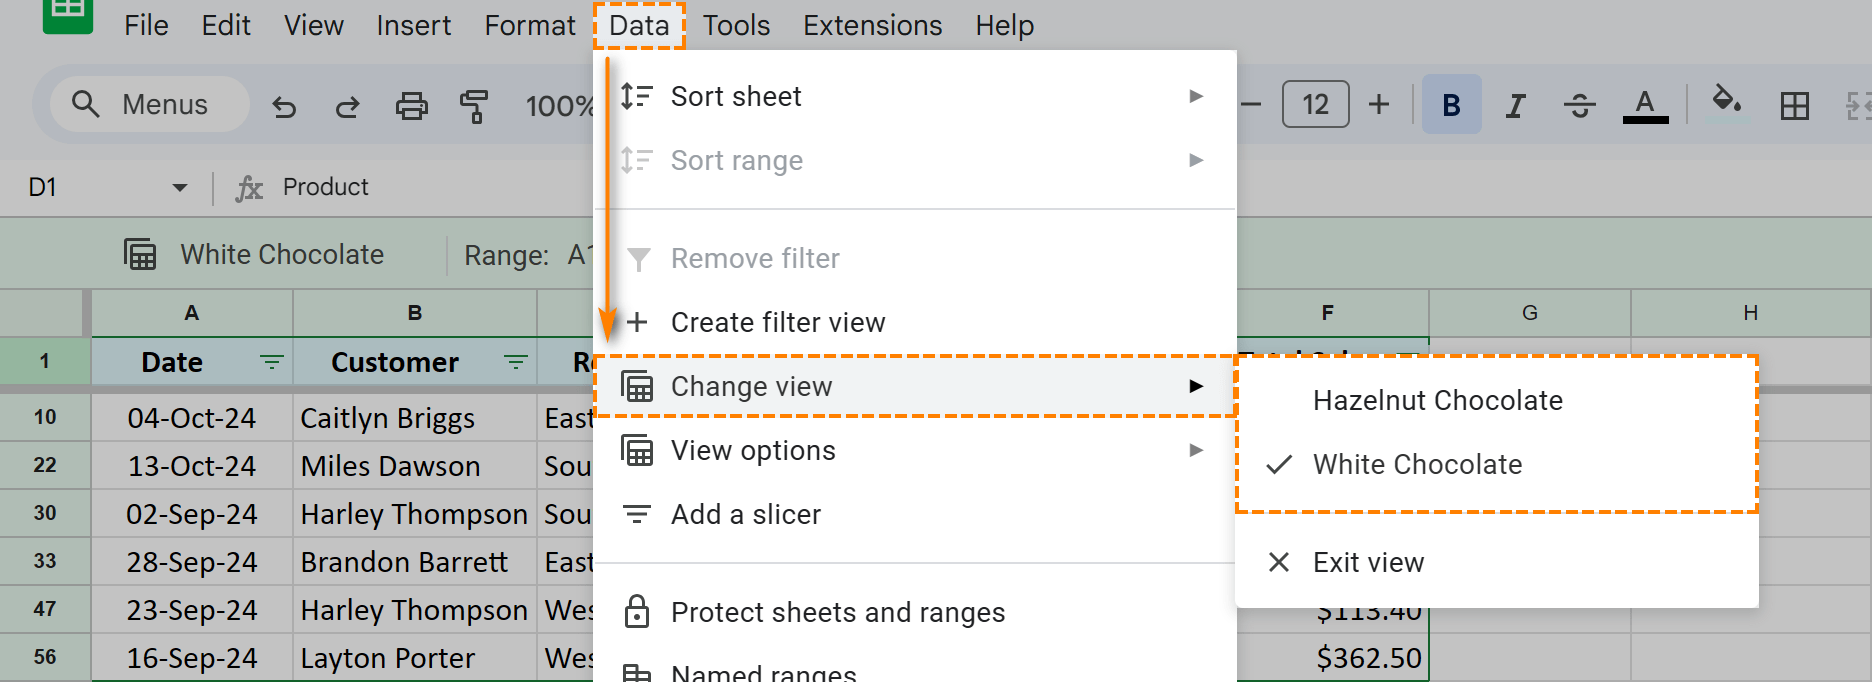 My saved and enabled filter views in the Change view menu.